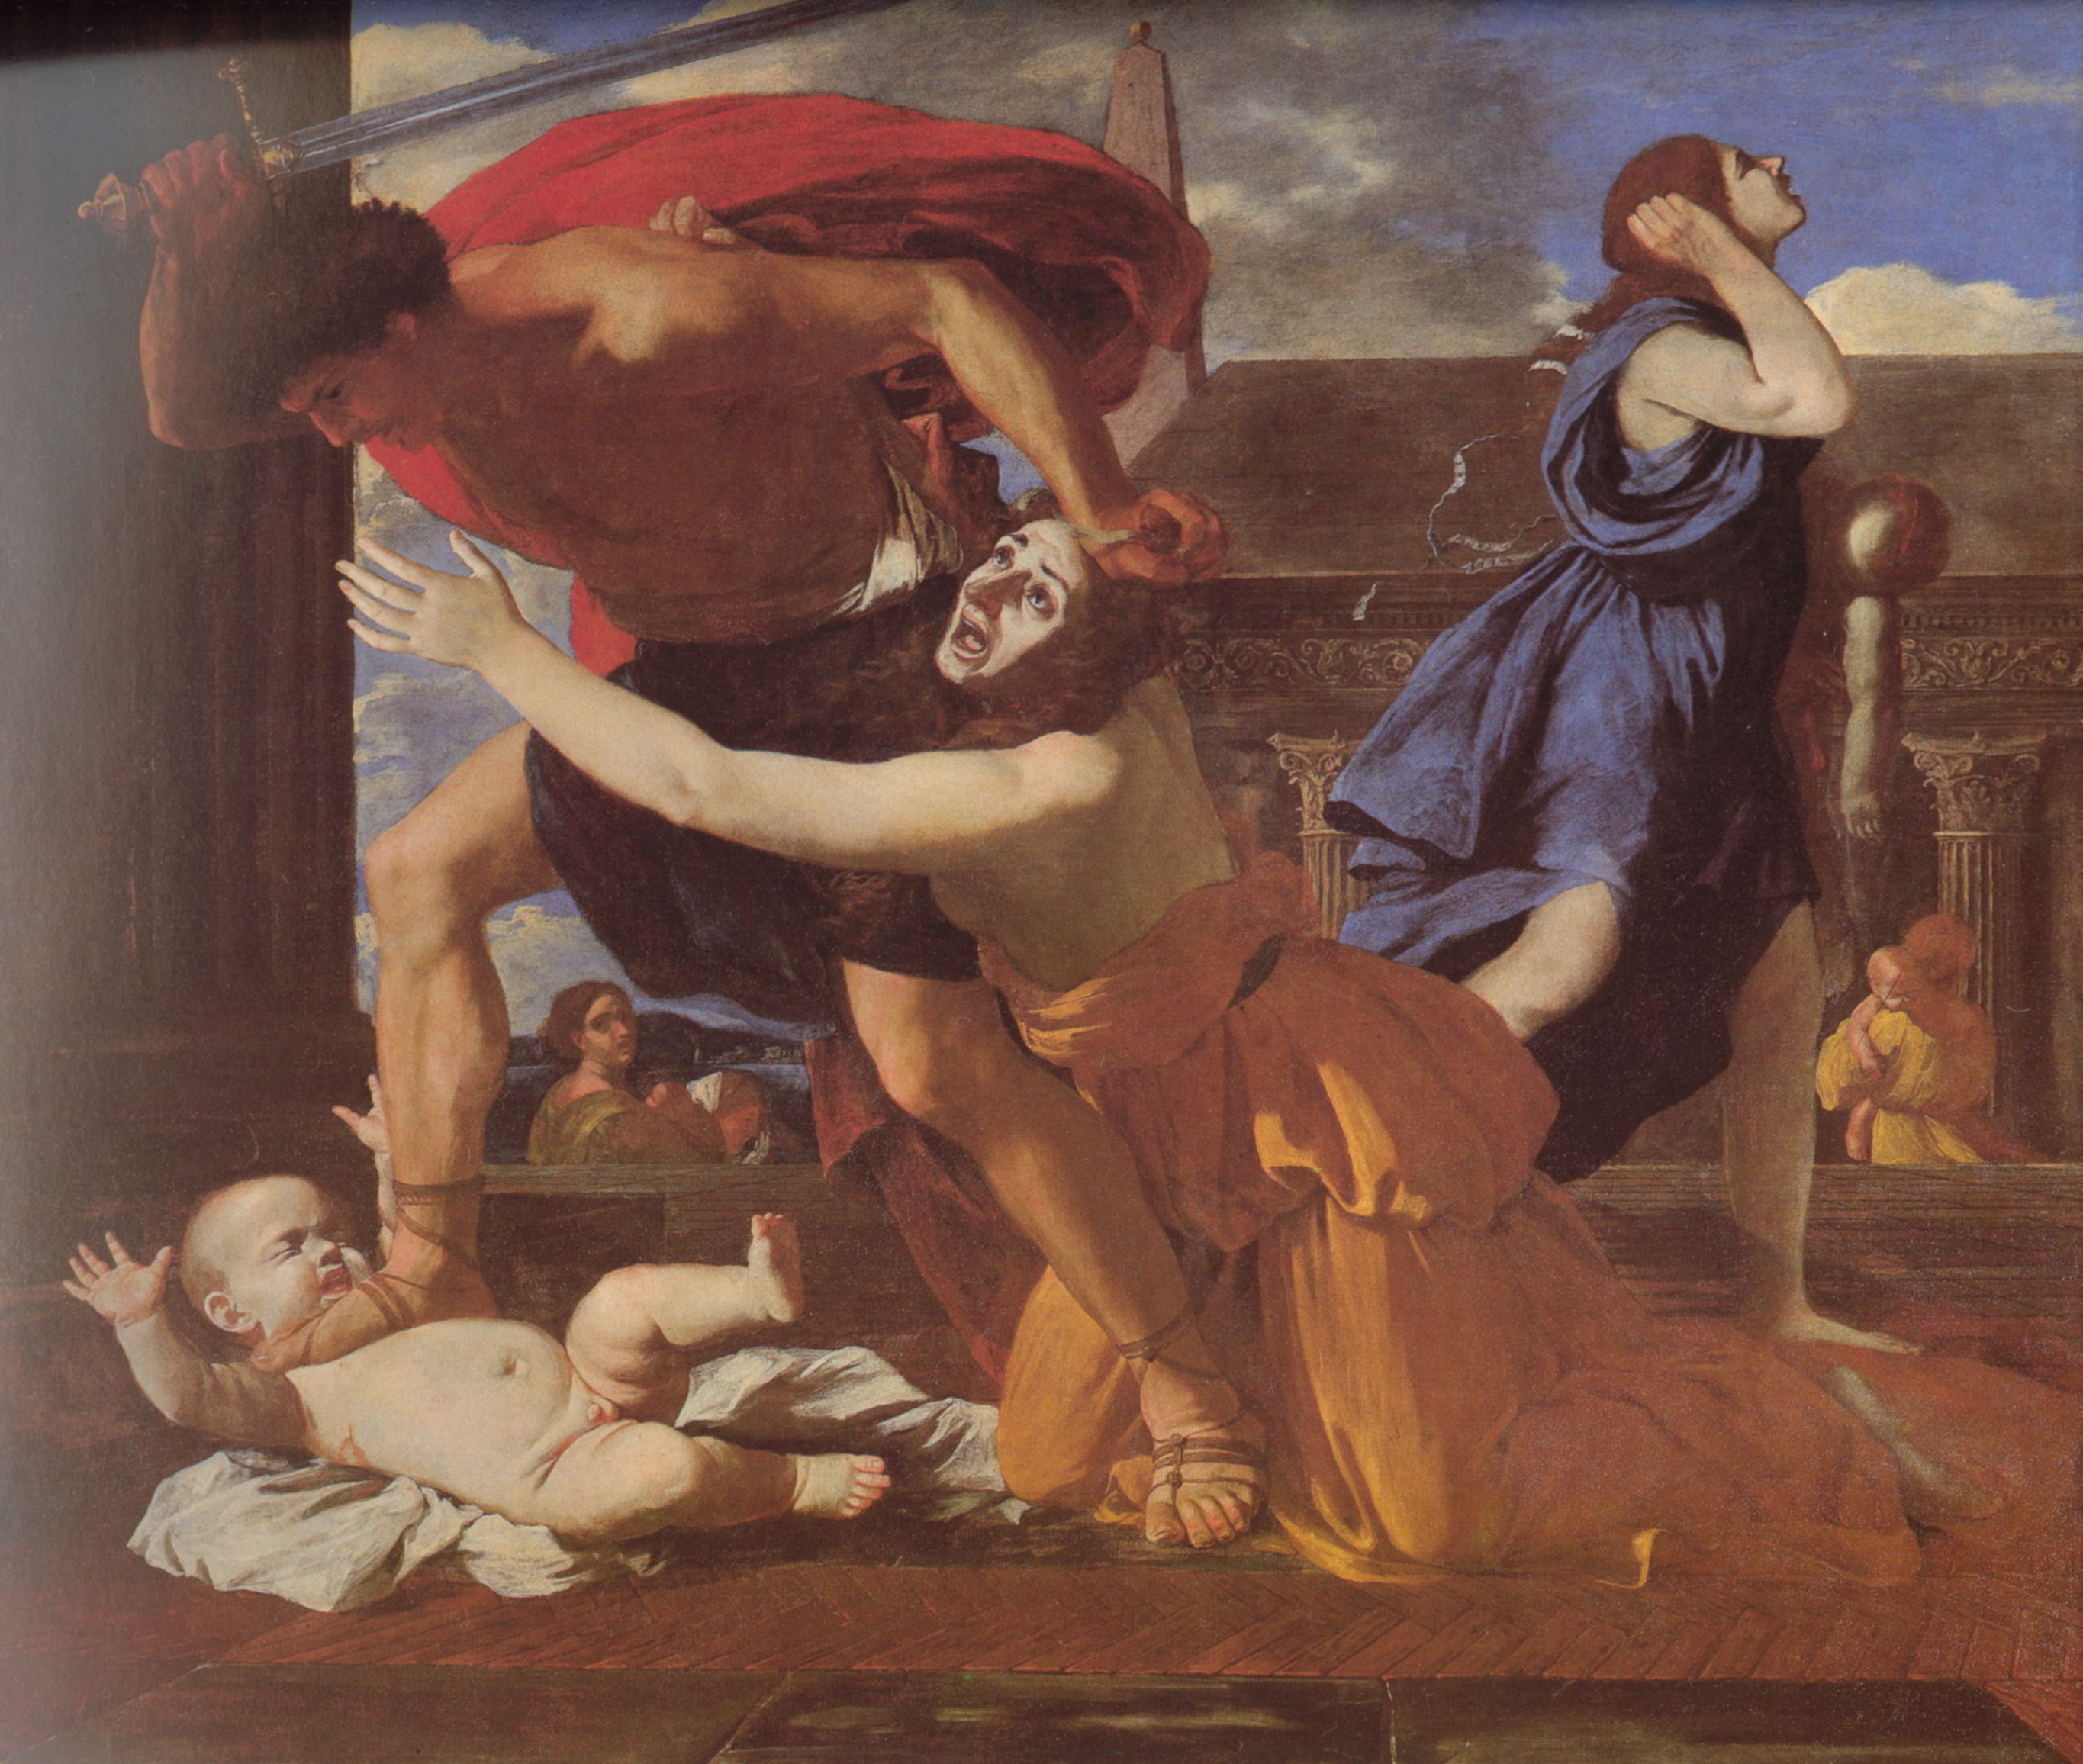 The Massacre of the Innocents by Nicolas Poussin